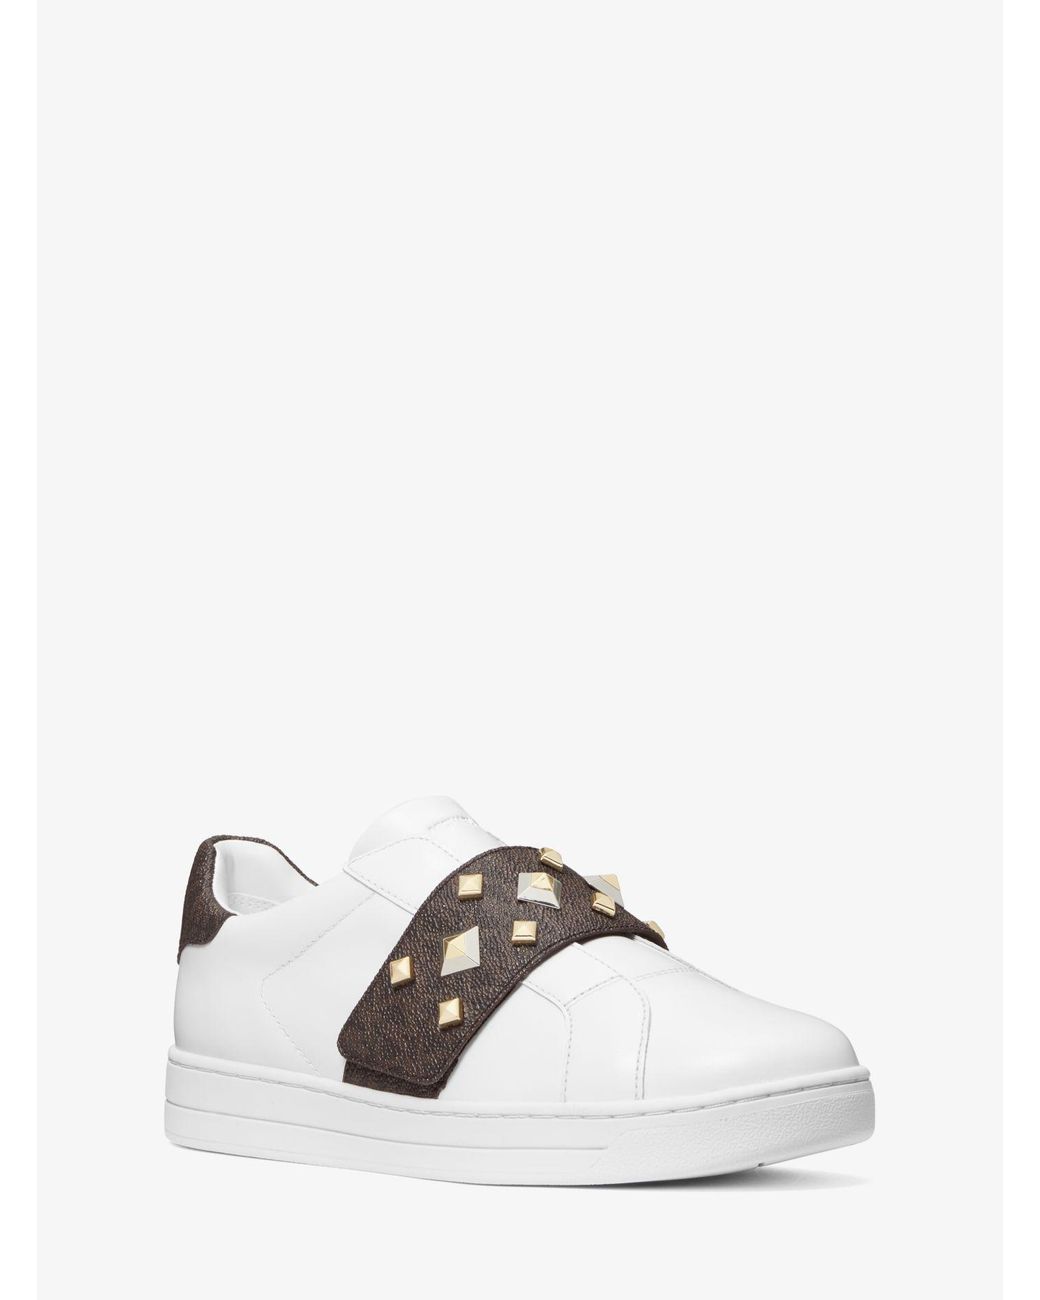 Michael Kors Kenna Leather And Studded Logo Sneaker in White | Lyst